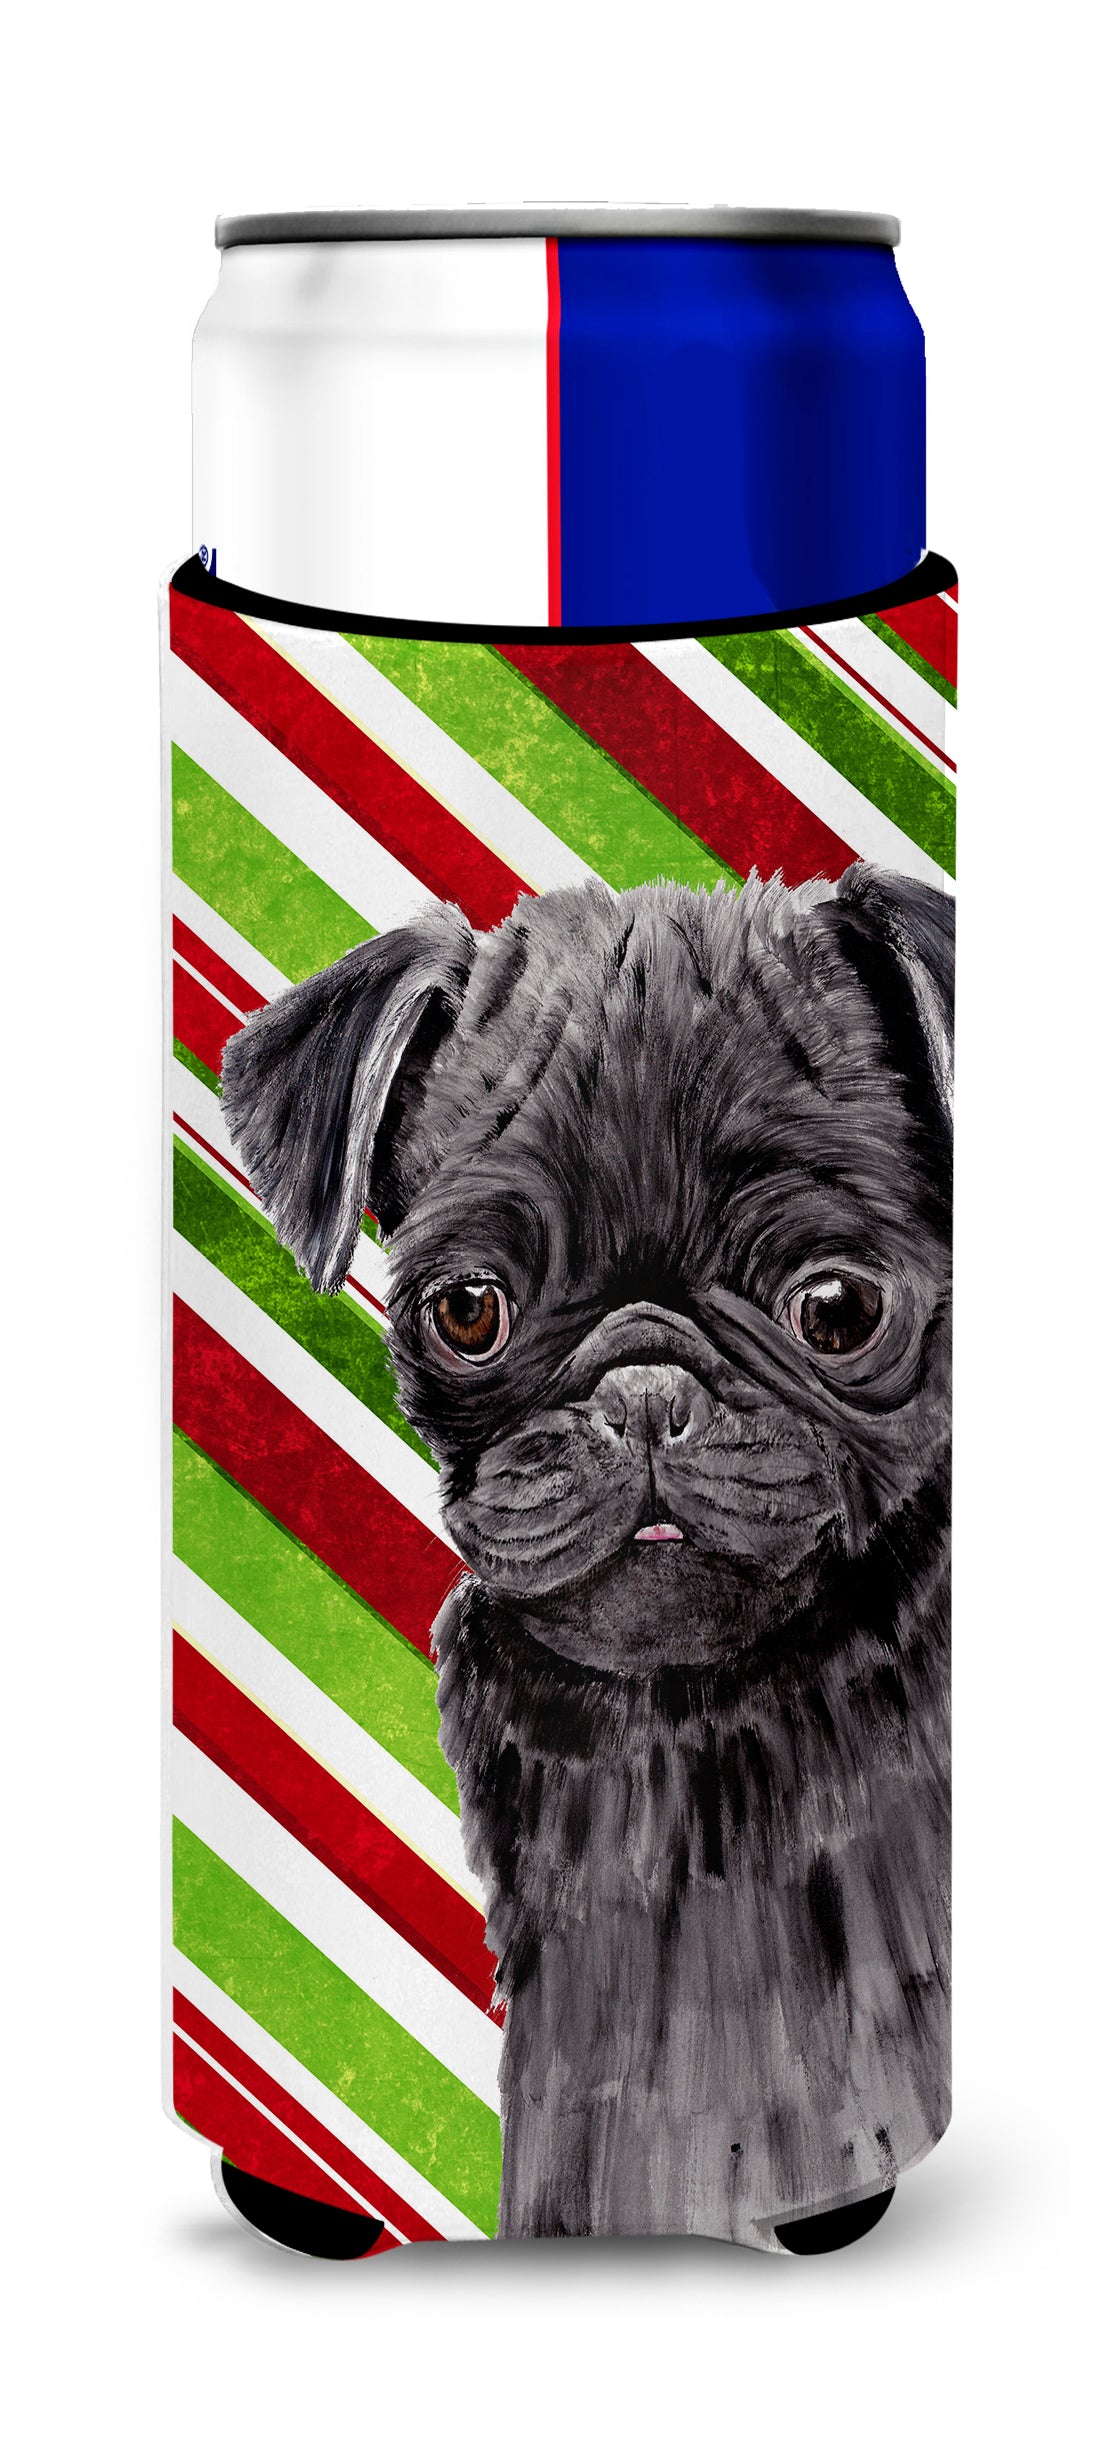 Pug Candy Cane Holiday Christmas Ultra Beverage Insulators for slim cans SC9326MUK.